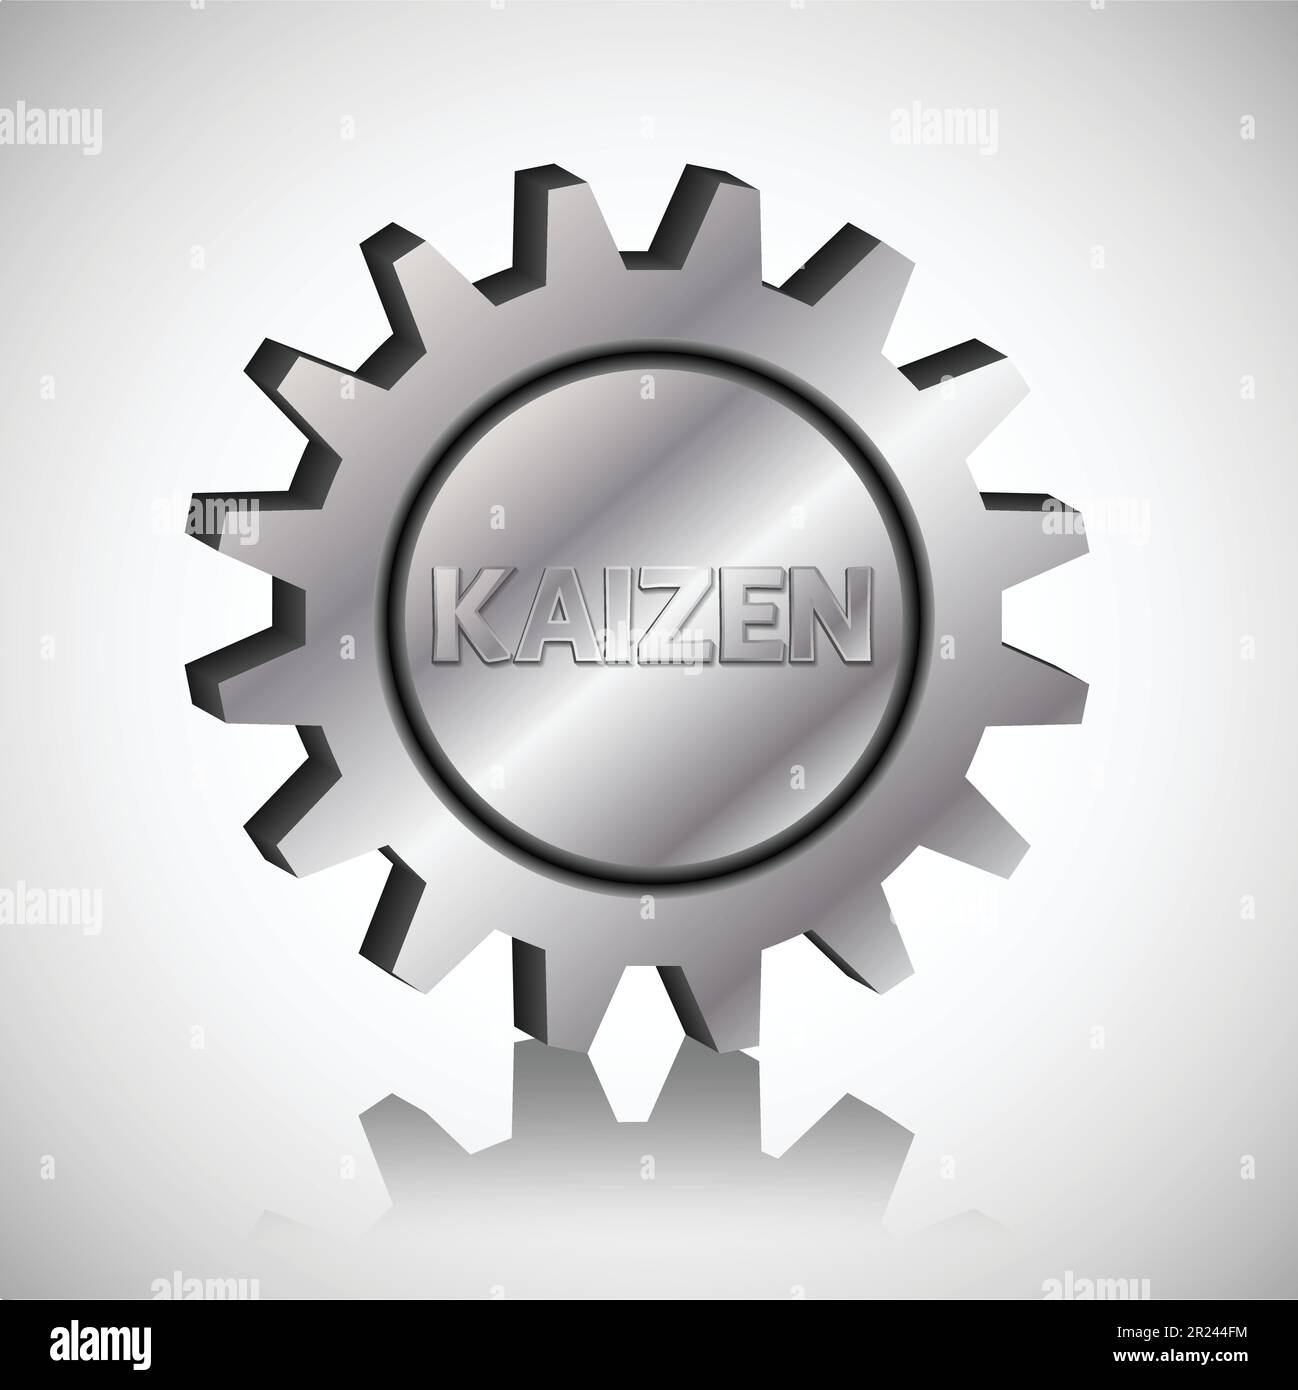 Kaizen text in a silver metal gear wheel. Kaizen is Japanese method of business, that improves process management and production. Stock Vector